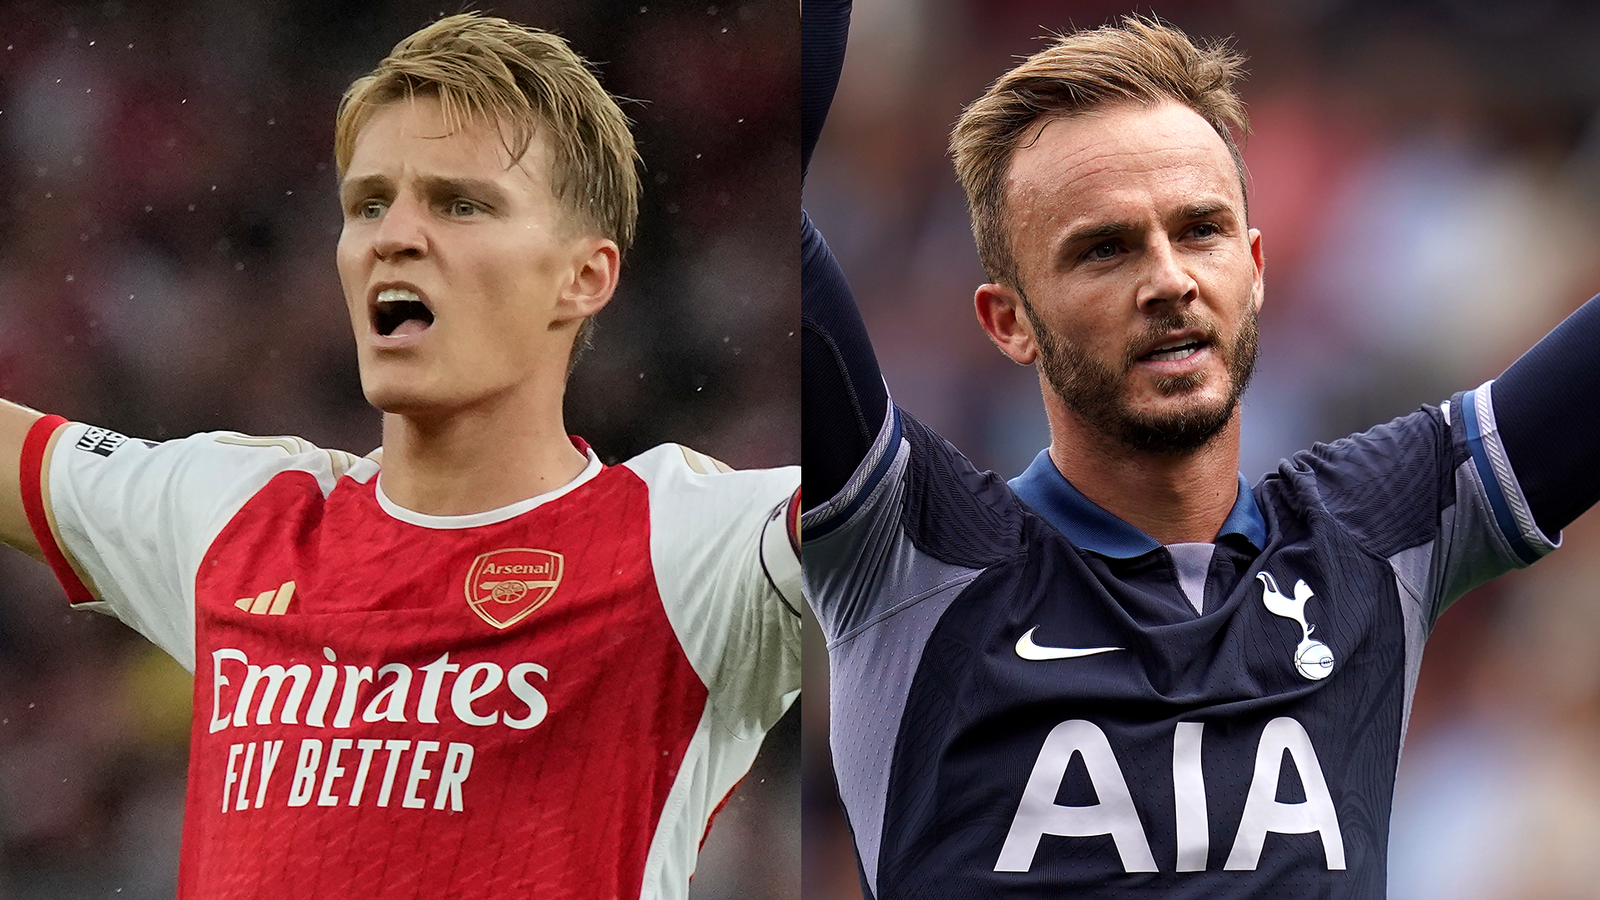 Arsenal vs Tottenham: The stats and styles behind the rivals’ impressive Premier League starts